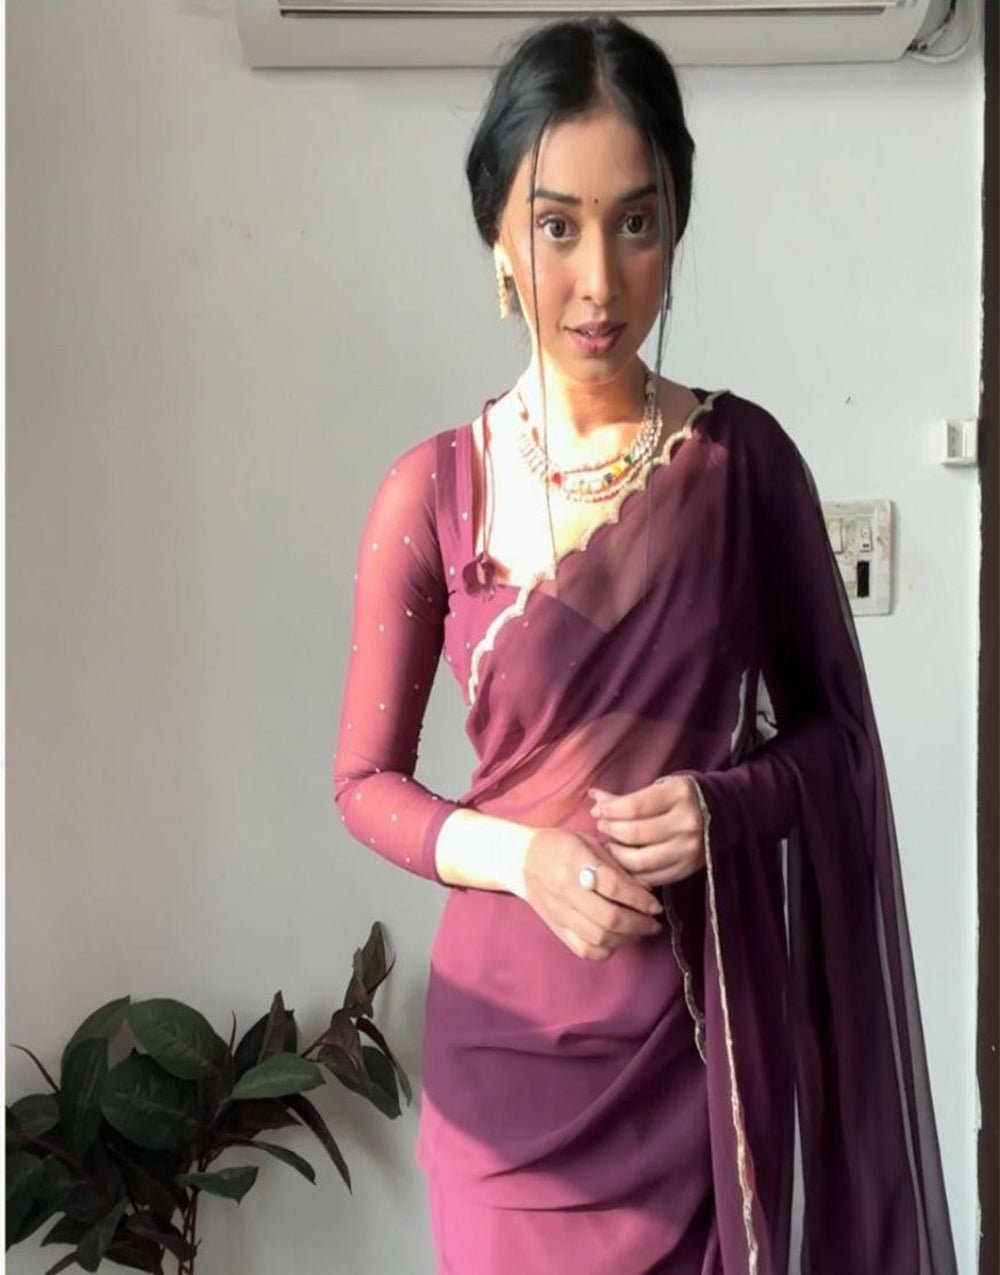 Wine Georgette With Stitched Blouse Ready To Wear Saree